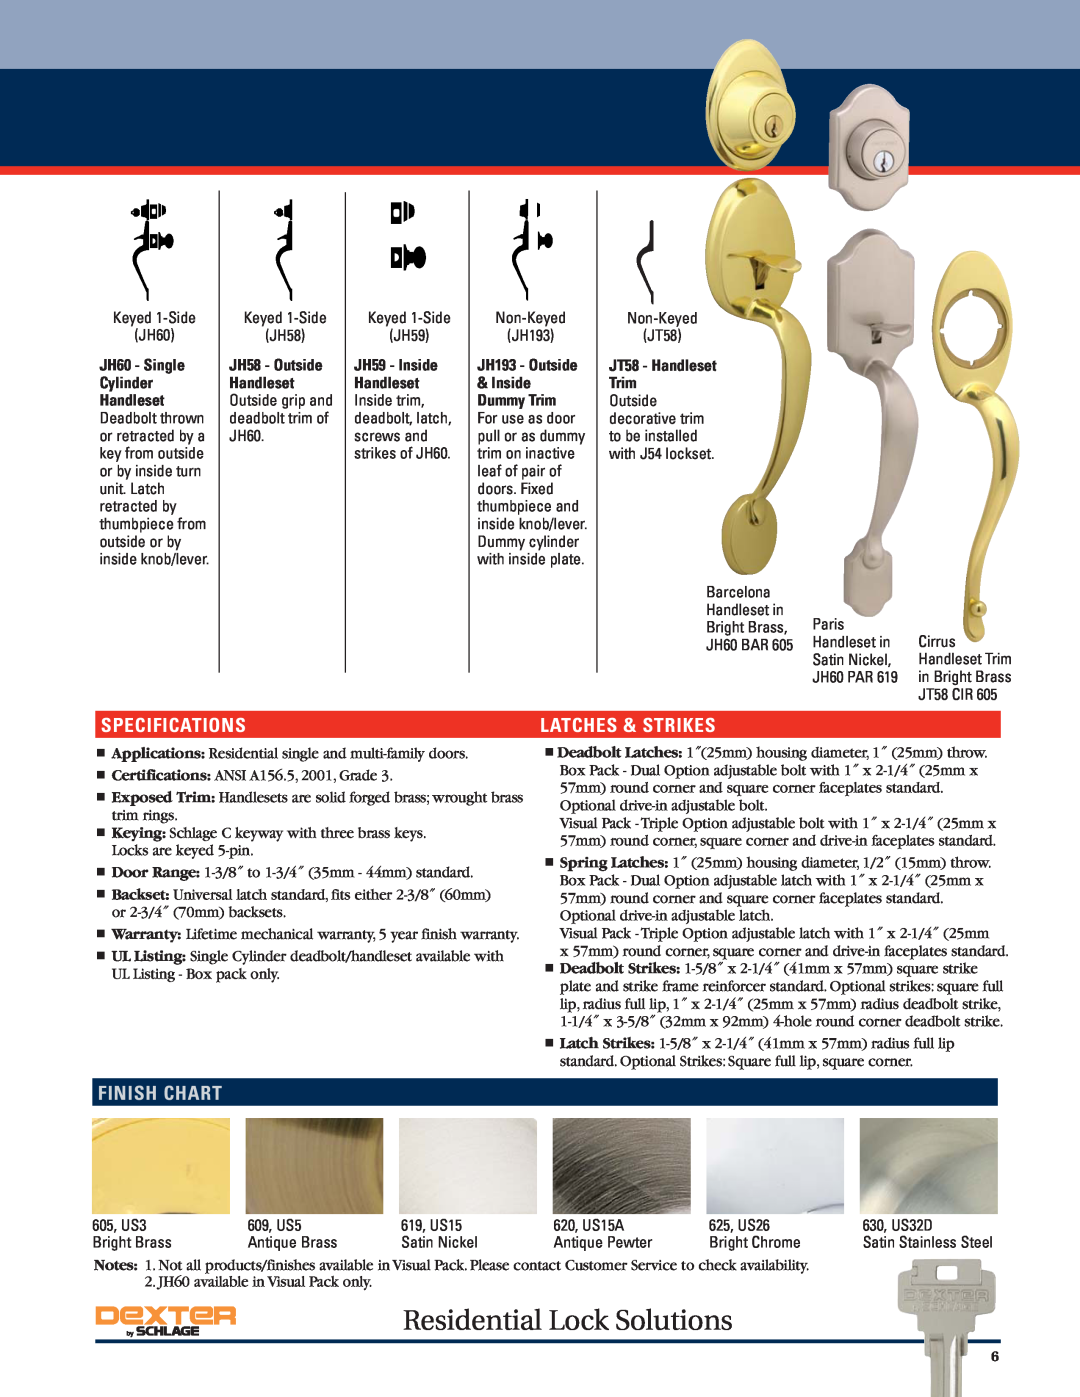 Schlage Residential Lock Solutions, Specifications, Latches & Strikes, Finish Chart, JT58 - Handleset, in Bright Brass 